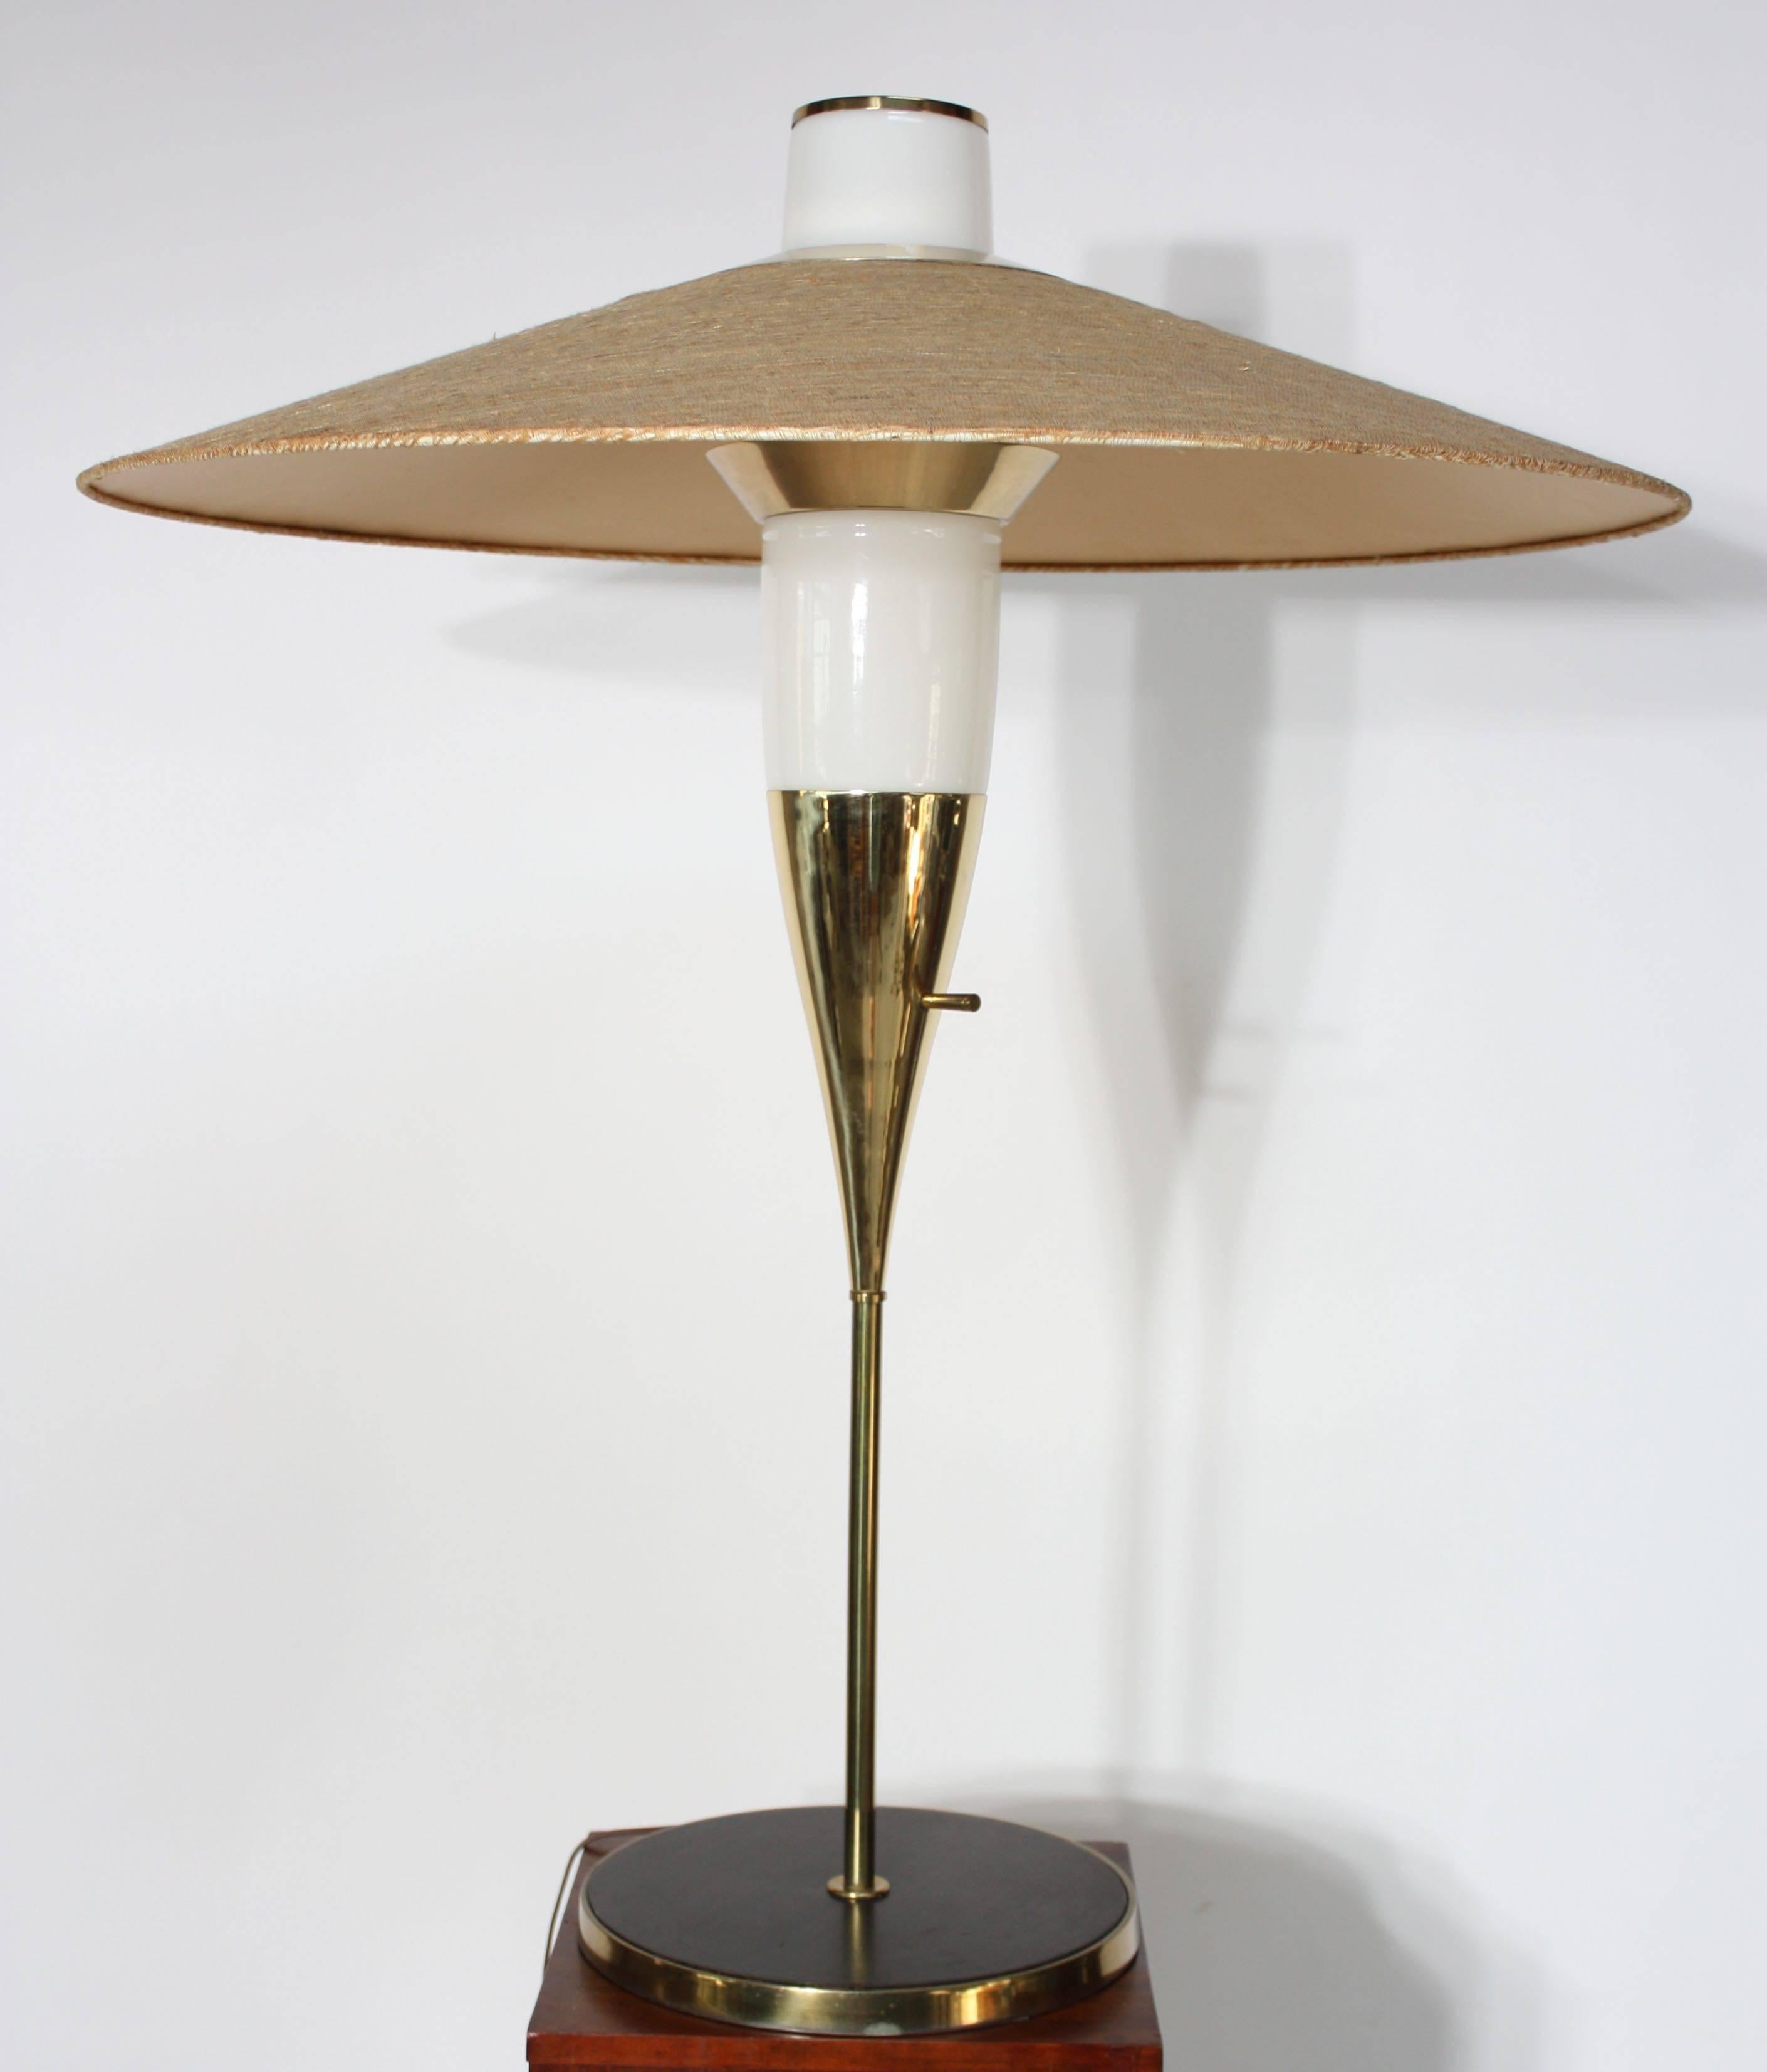 This extremely rare table lamp was designed by Raymond Loewy for Stiffel in 1957. This model (#9659) is only present in the 1957 Stiffel catalog and is therefore believed to have been in production for that year alone. It is composed of a rosewood